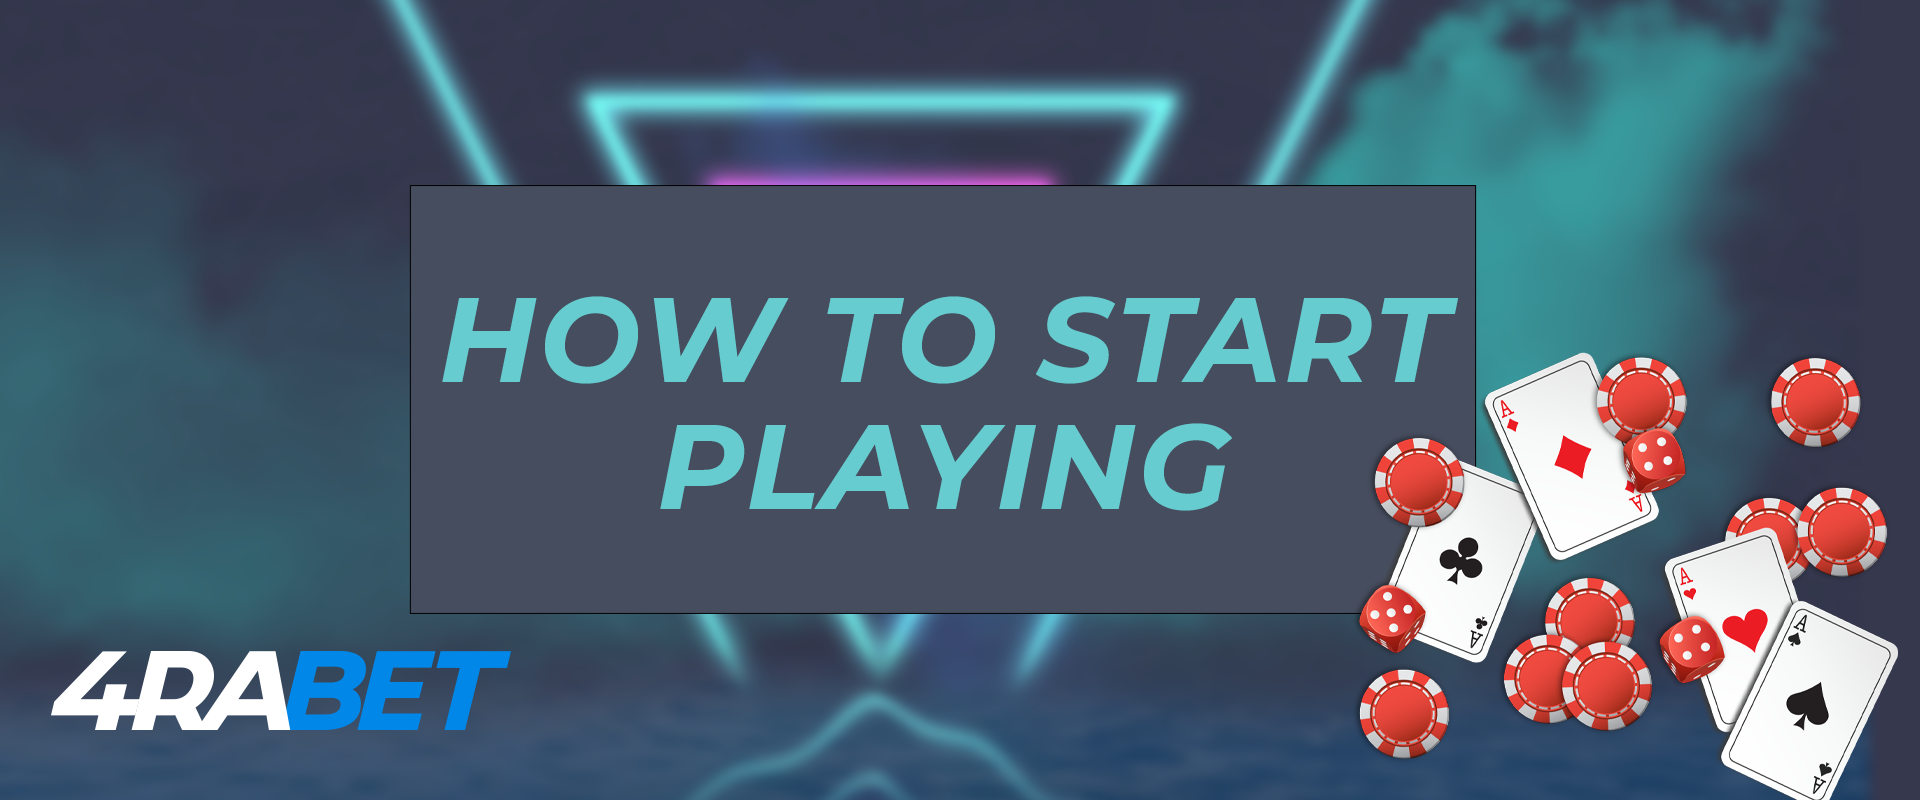 How to start playing blackjack on the 4rabet.